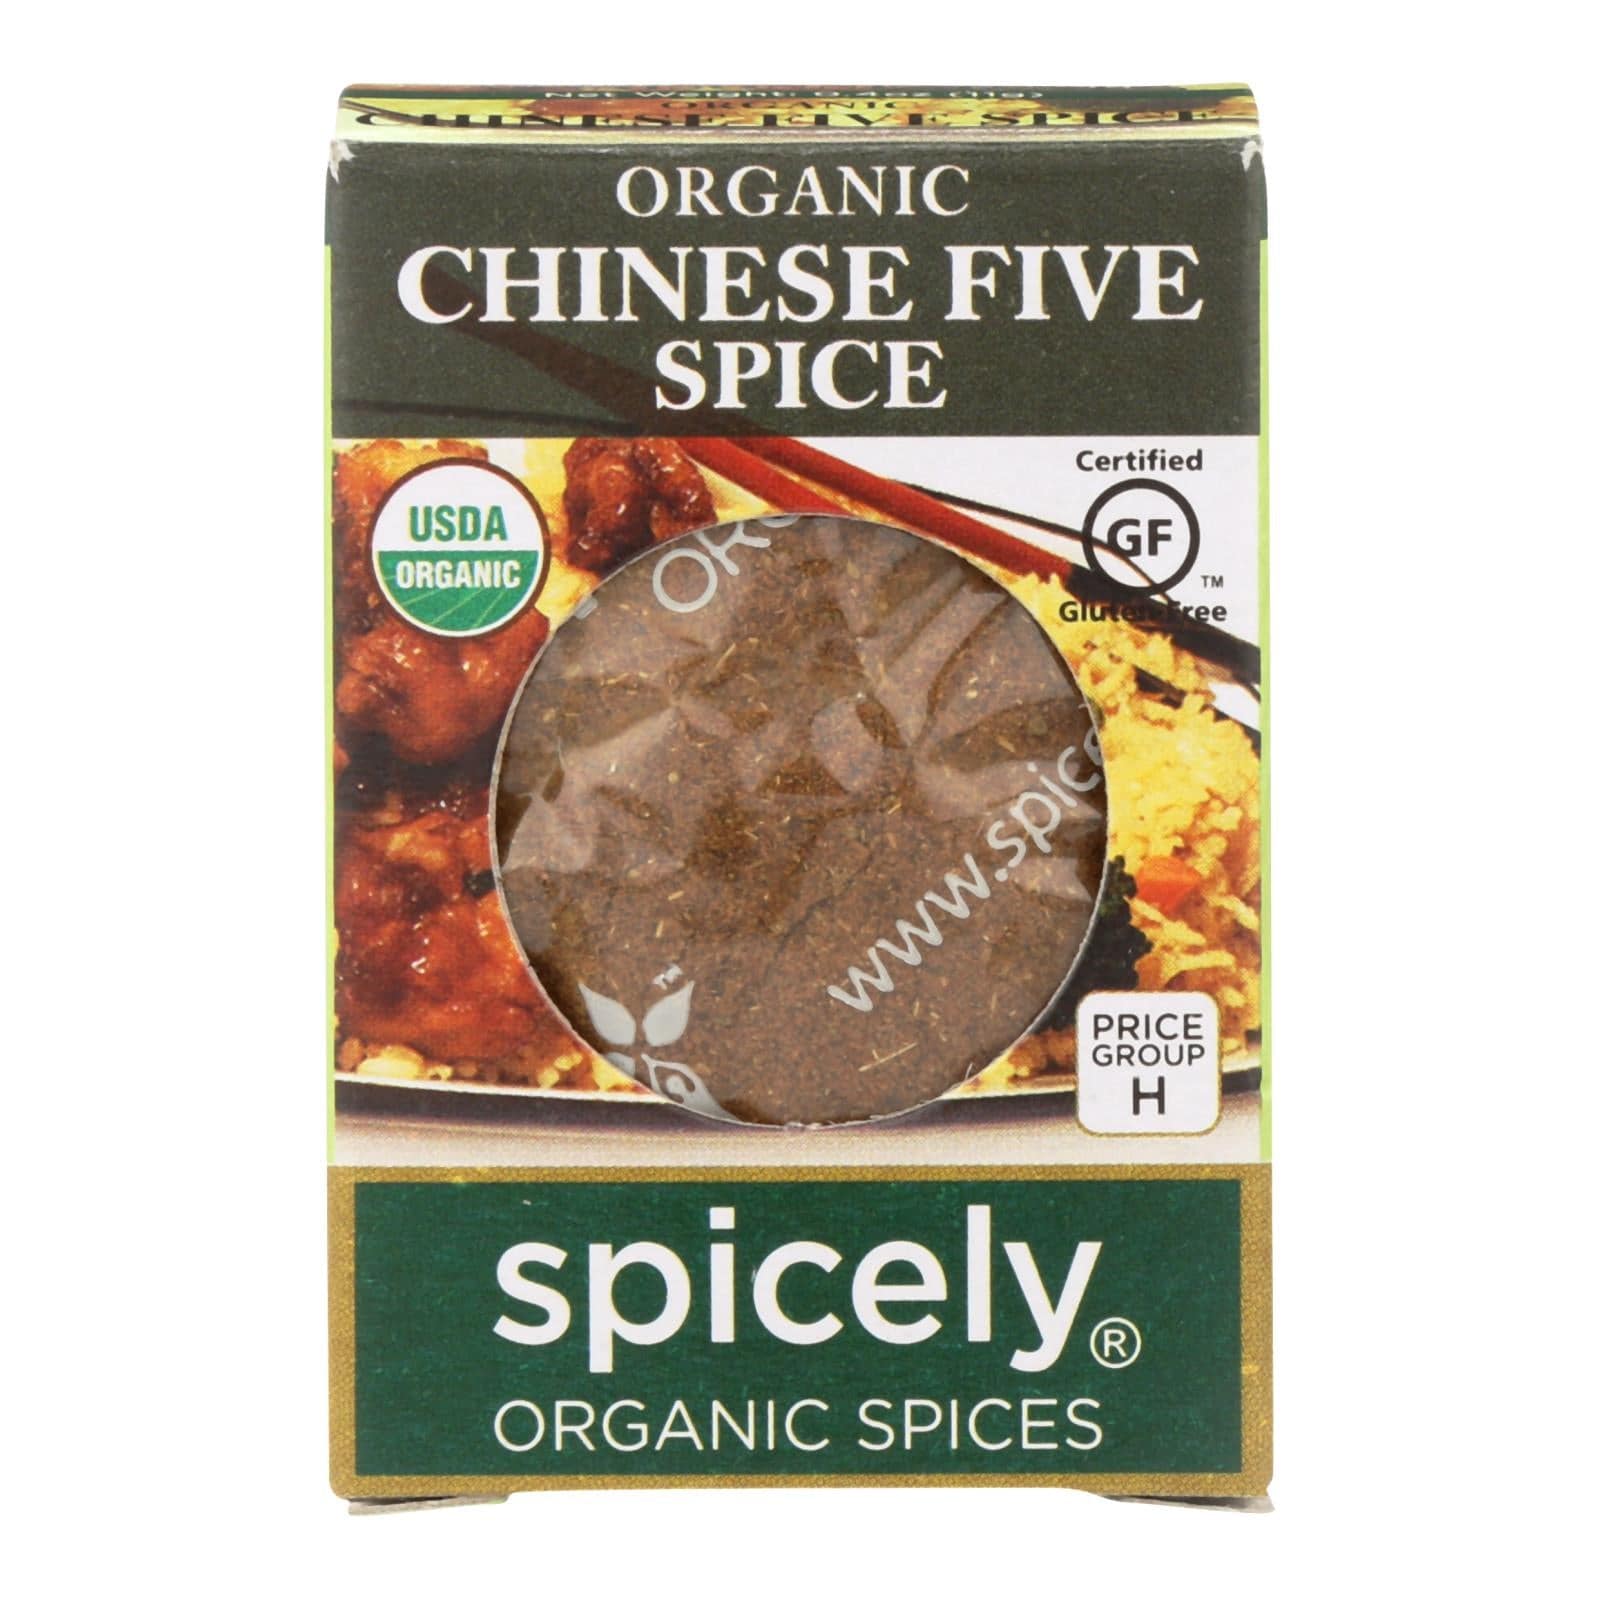 Buy Spicely Organics - Organic Chinese 5 Spice Seasoning - Case Of 6 - 0.4 Oz.  at OnlyNaturals.us